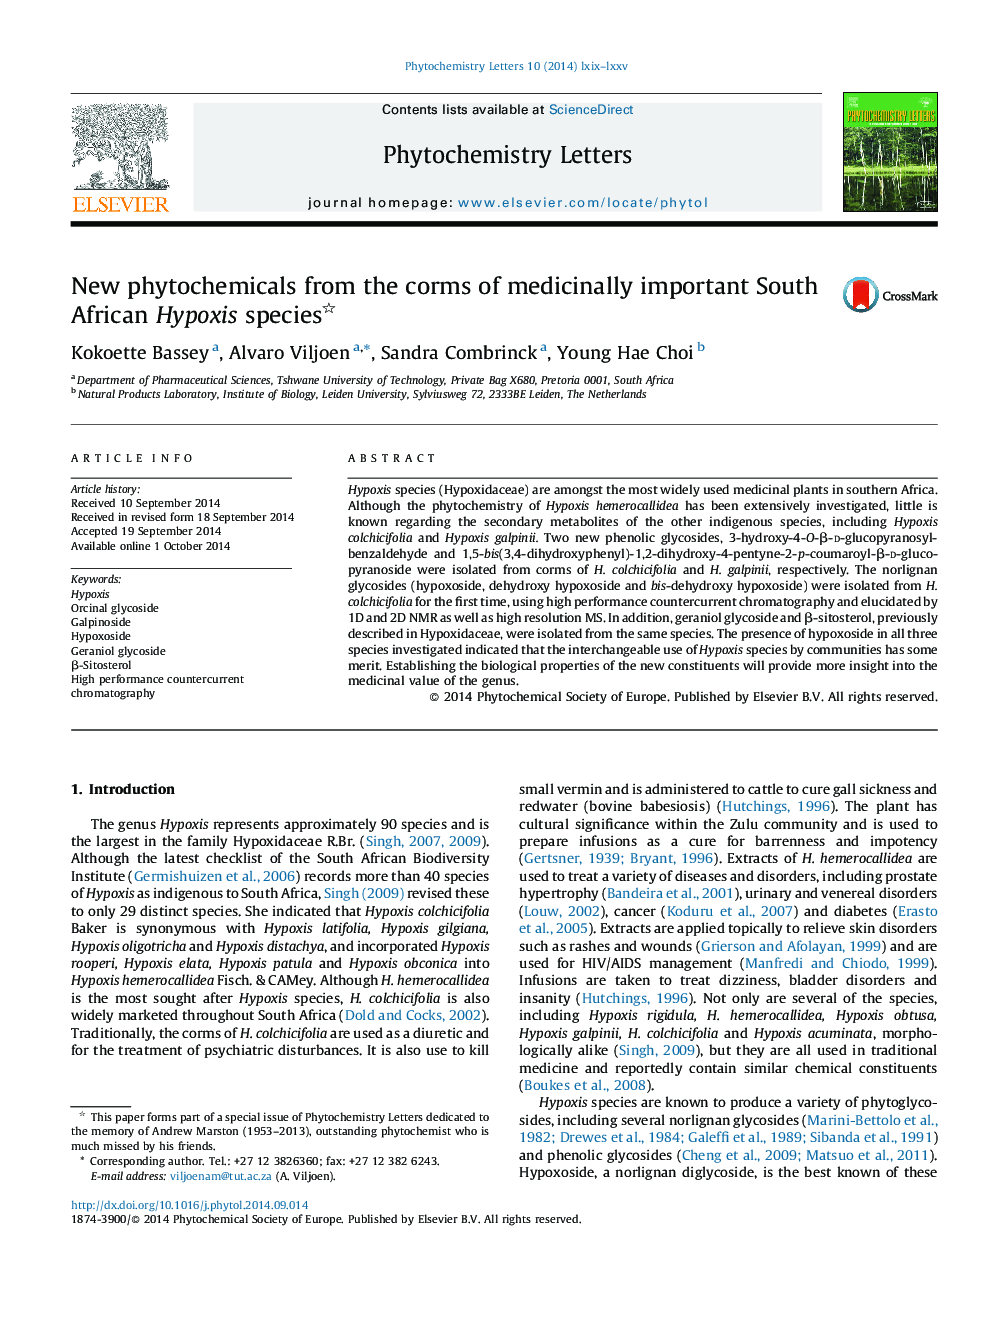 New phytochemicals from the corms of medicinally important South African Hypoxis species